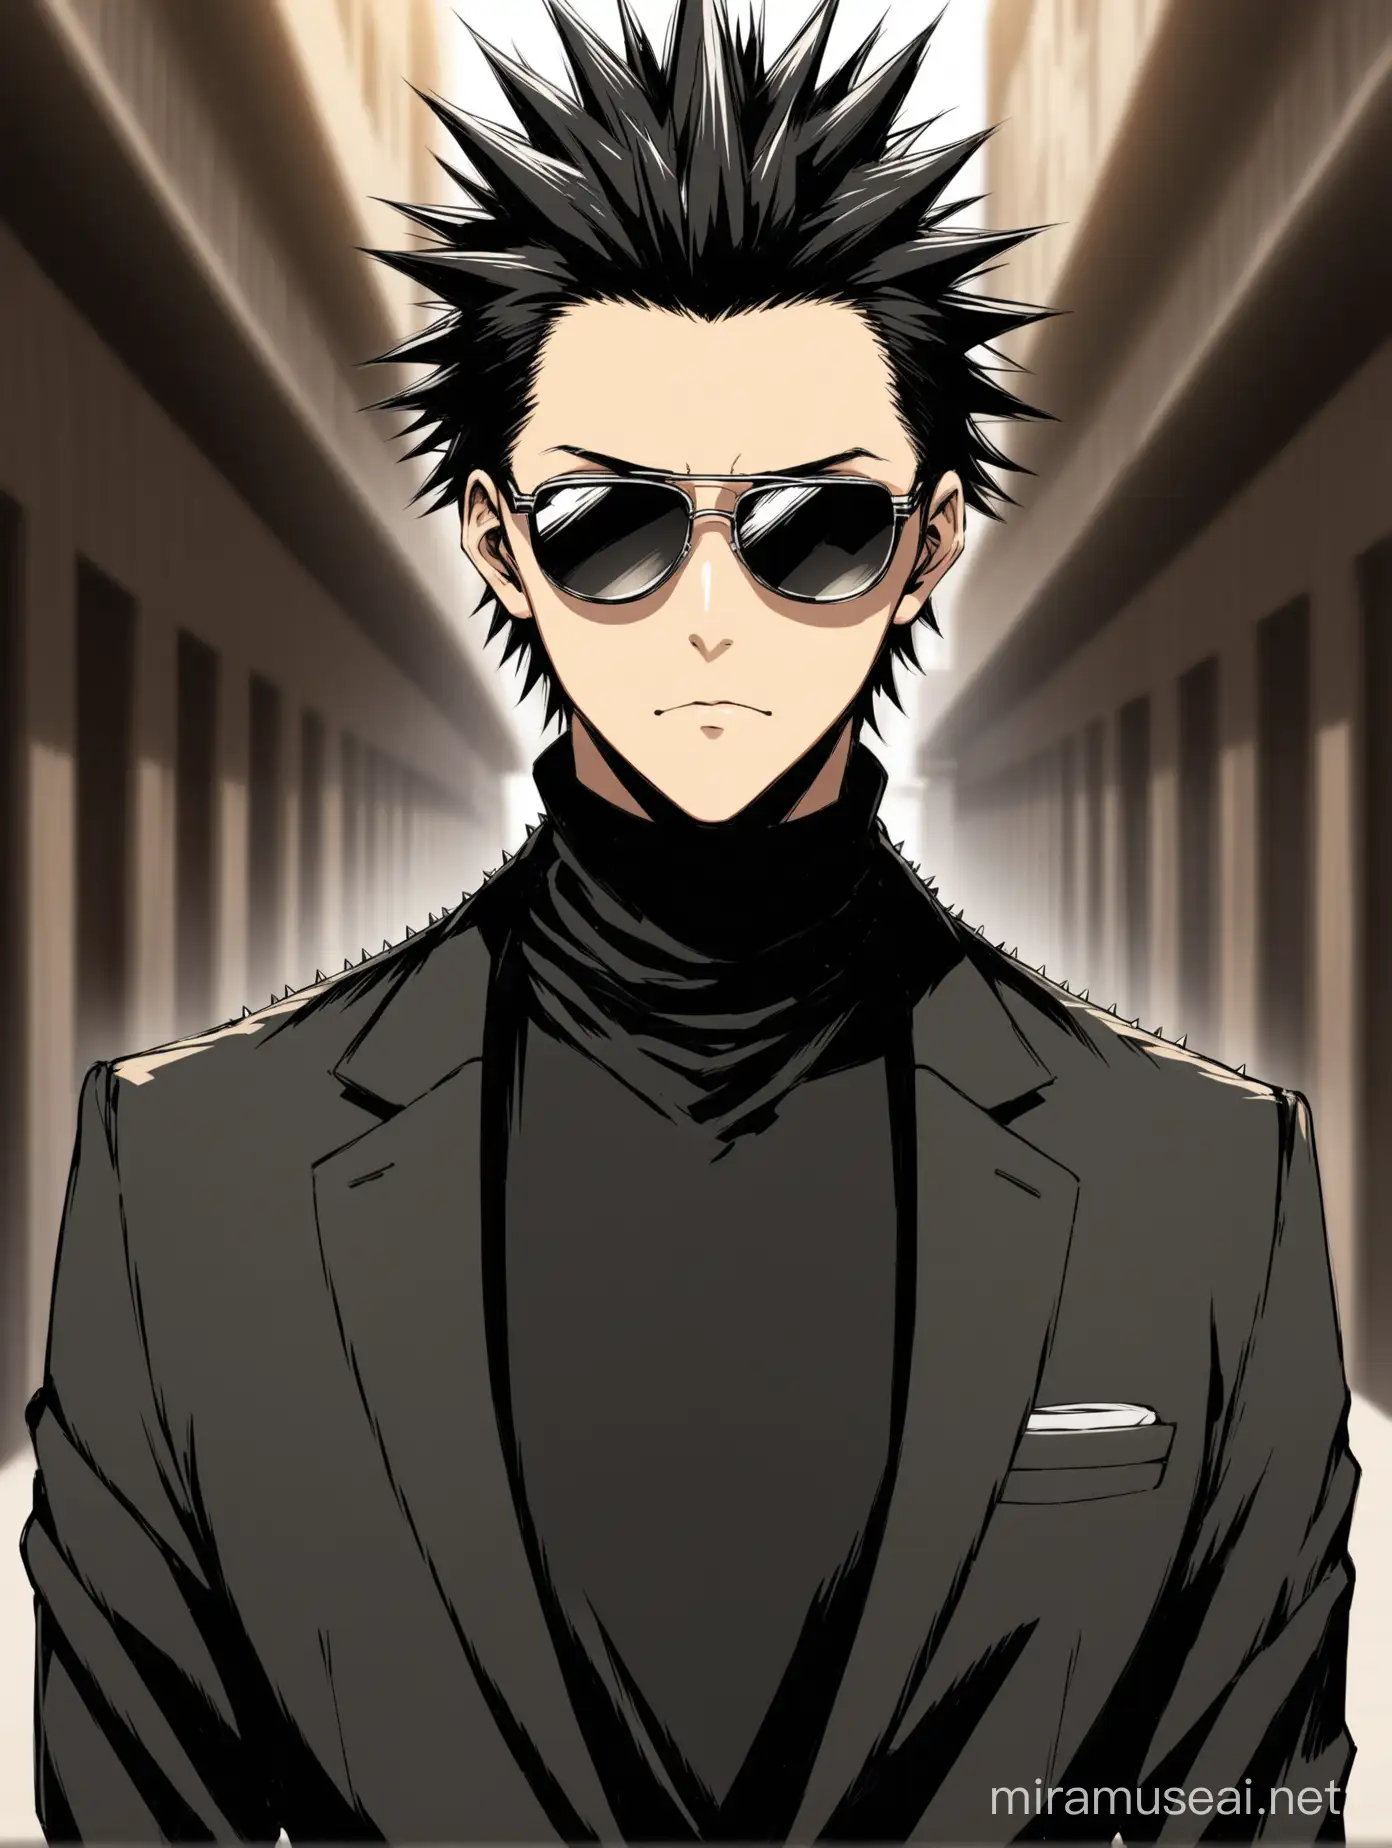 Stylish Anime Character with Spiky Hair Sunglasses Suit and Turtleneck